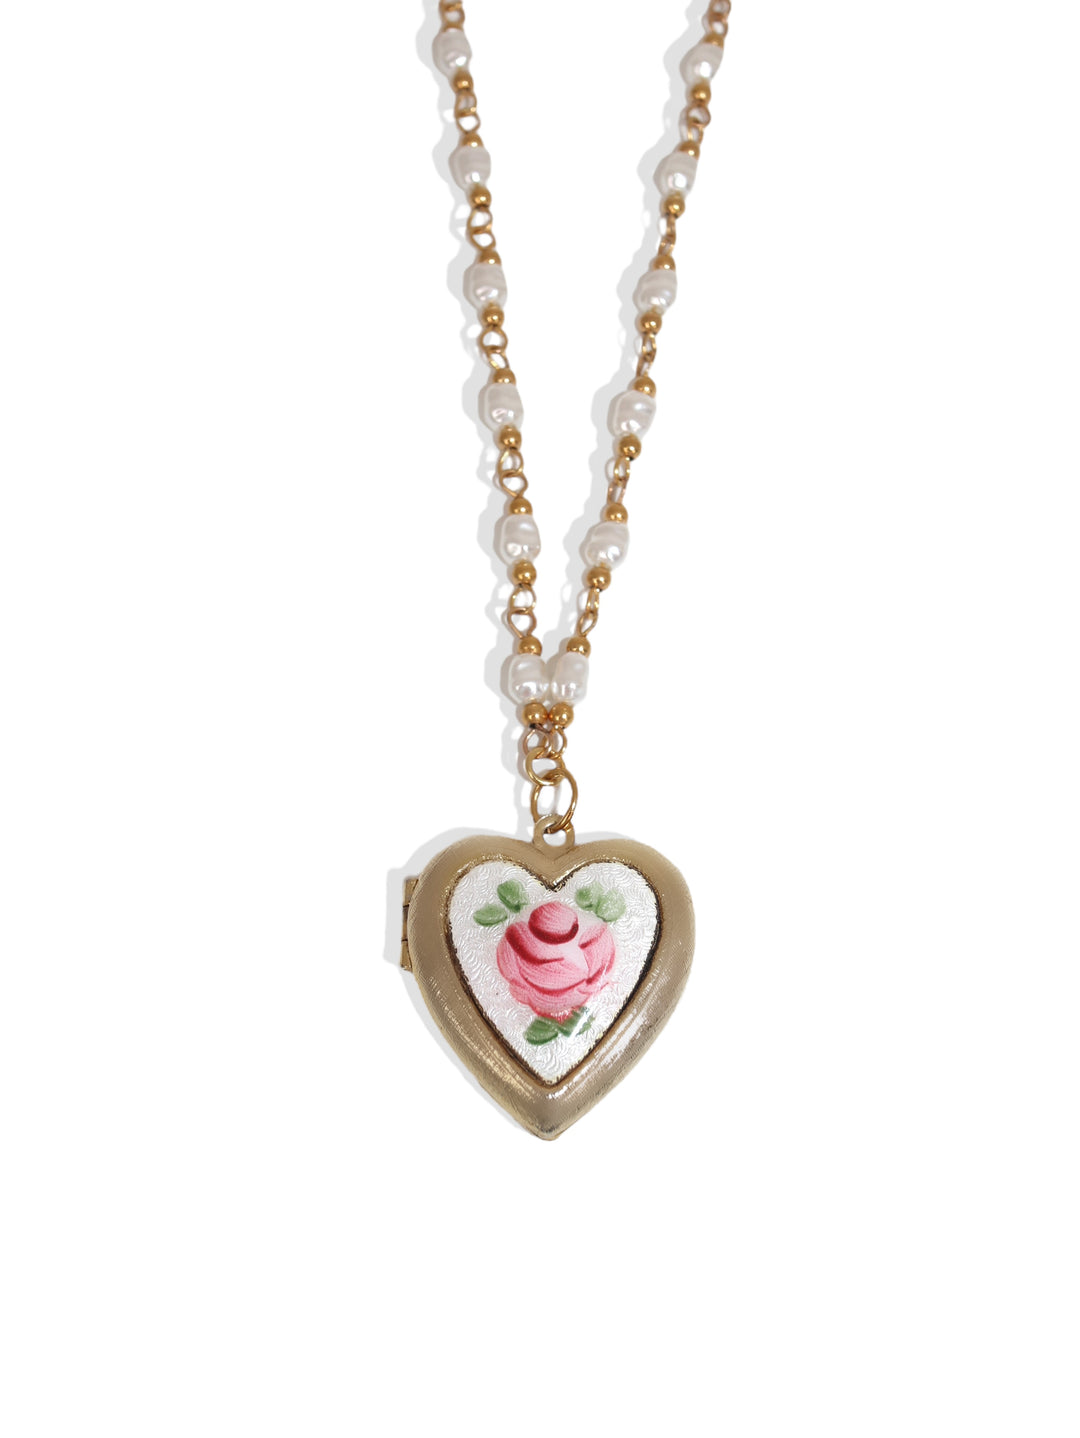 The Flower Girl Locket Necklace